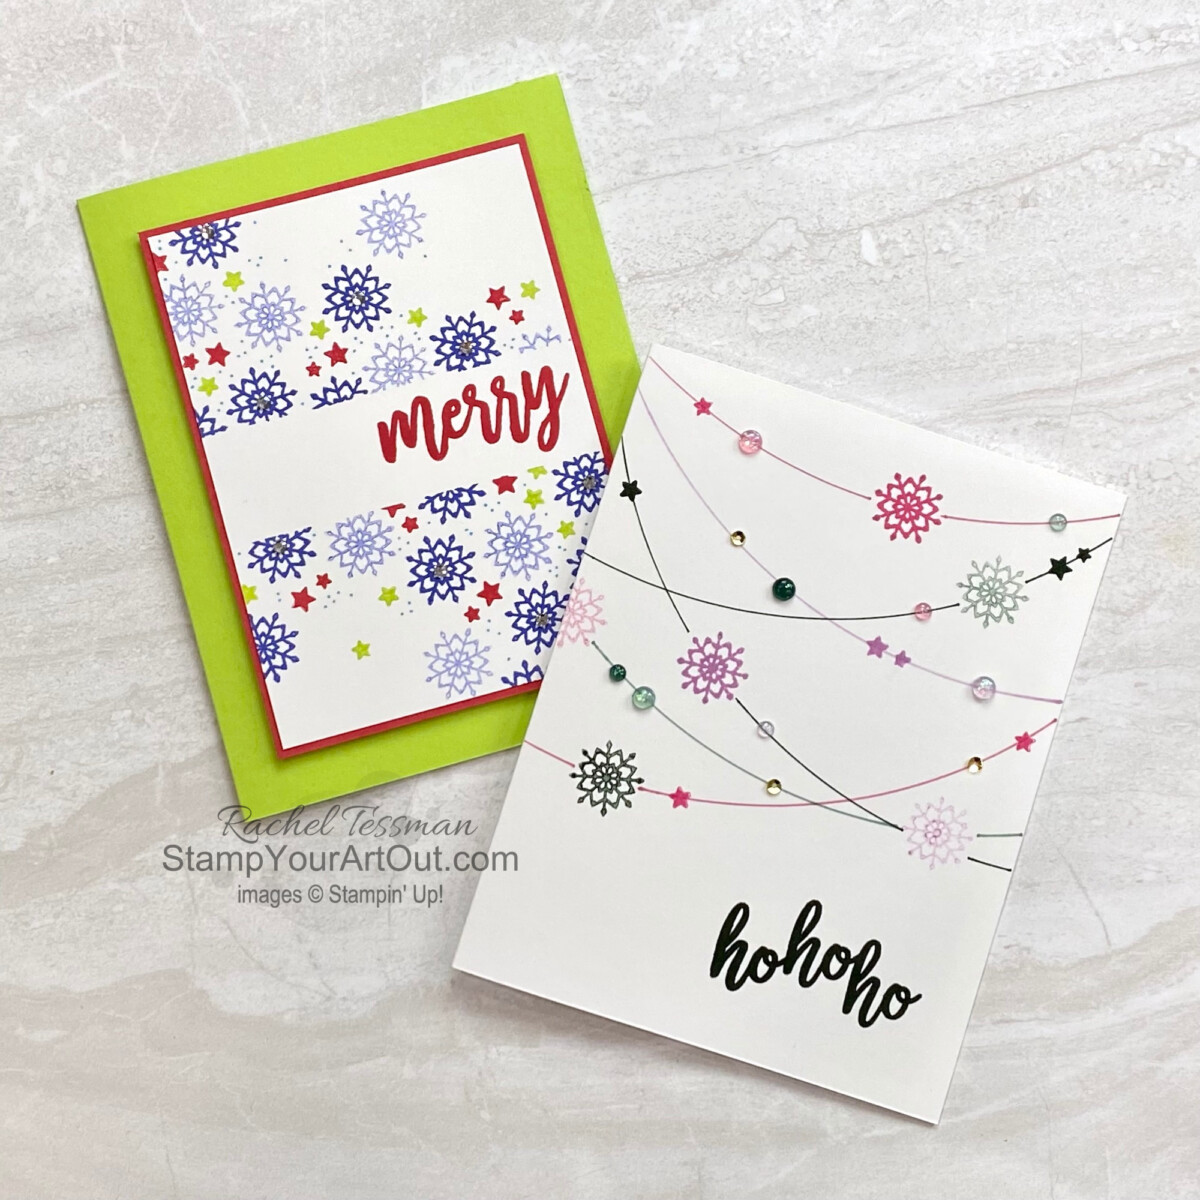 Once you use up the consumables in the October 2022 Ho Ho Ho Paper Pumpkin Kit from Stampin’ Up!, you still have those stamps (and ink) left!. Visit my 11/4/22 blog post to see a couple cards that I made featuring the stamps, some ink & cardstock, and an embellishment. You’ll find more photos, measurements, a supply list, and directions. PLUS you can see several other alternate project ideas created with this kit by fellow Stampin’ Up! demonstrators in our blog hop: “A Paper Pumpkin Thing”! - Stampin’ Up!® - Stamp Your Art Out! www.stampyourartout.com